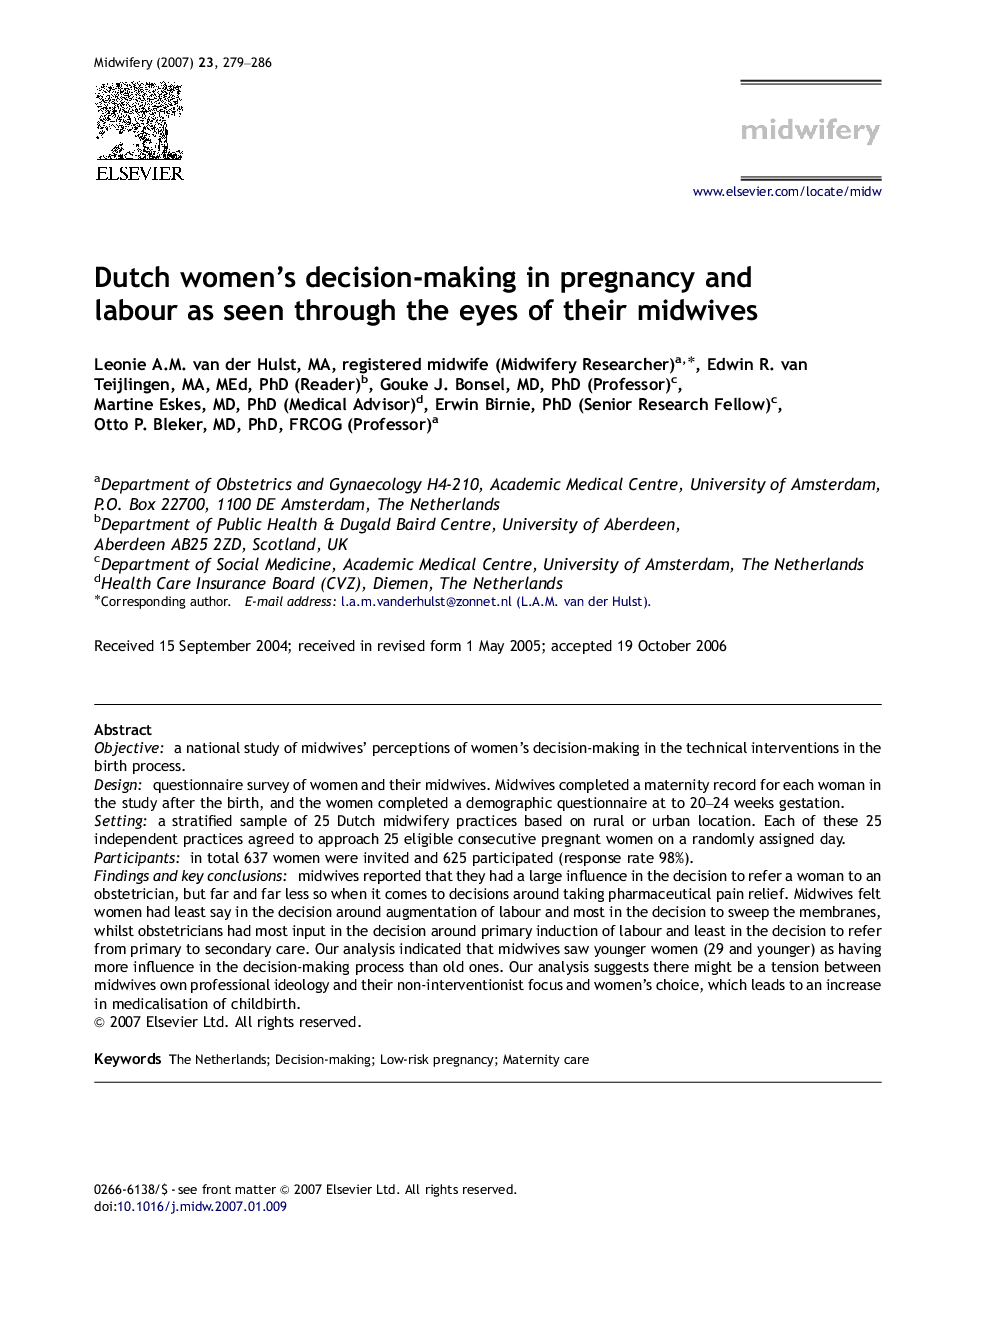 Dutch women's decision-making in pregnancy and labour as seen through the eyes of their midwives